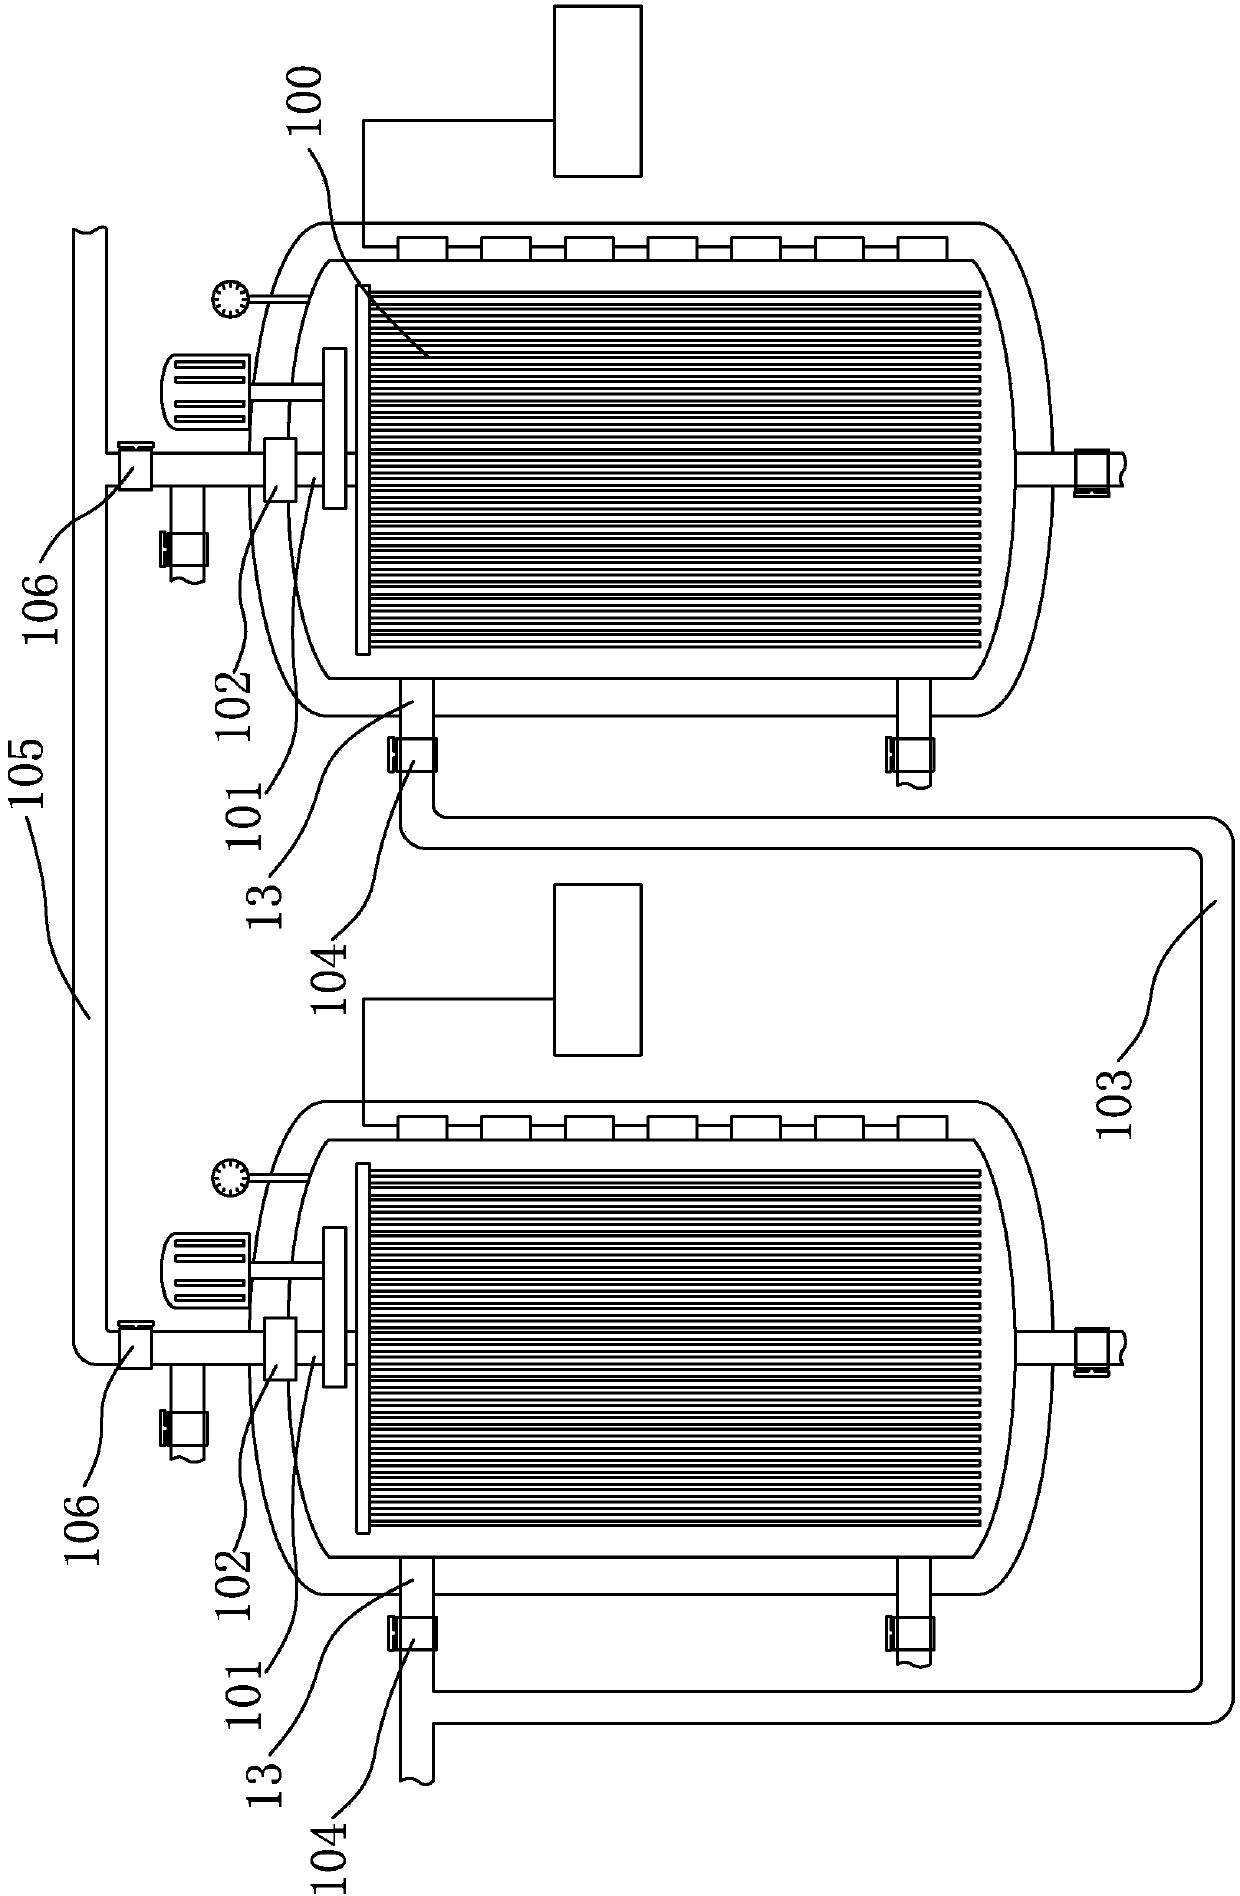 Membrane filtration equipment and method with ultrasonic cleaning function as well as sewage purification system